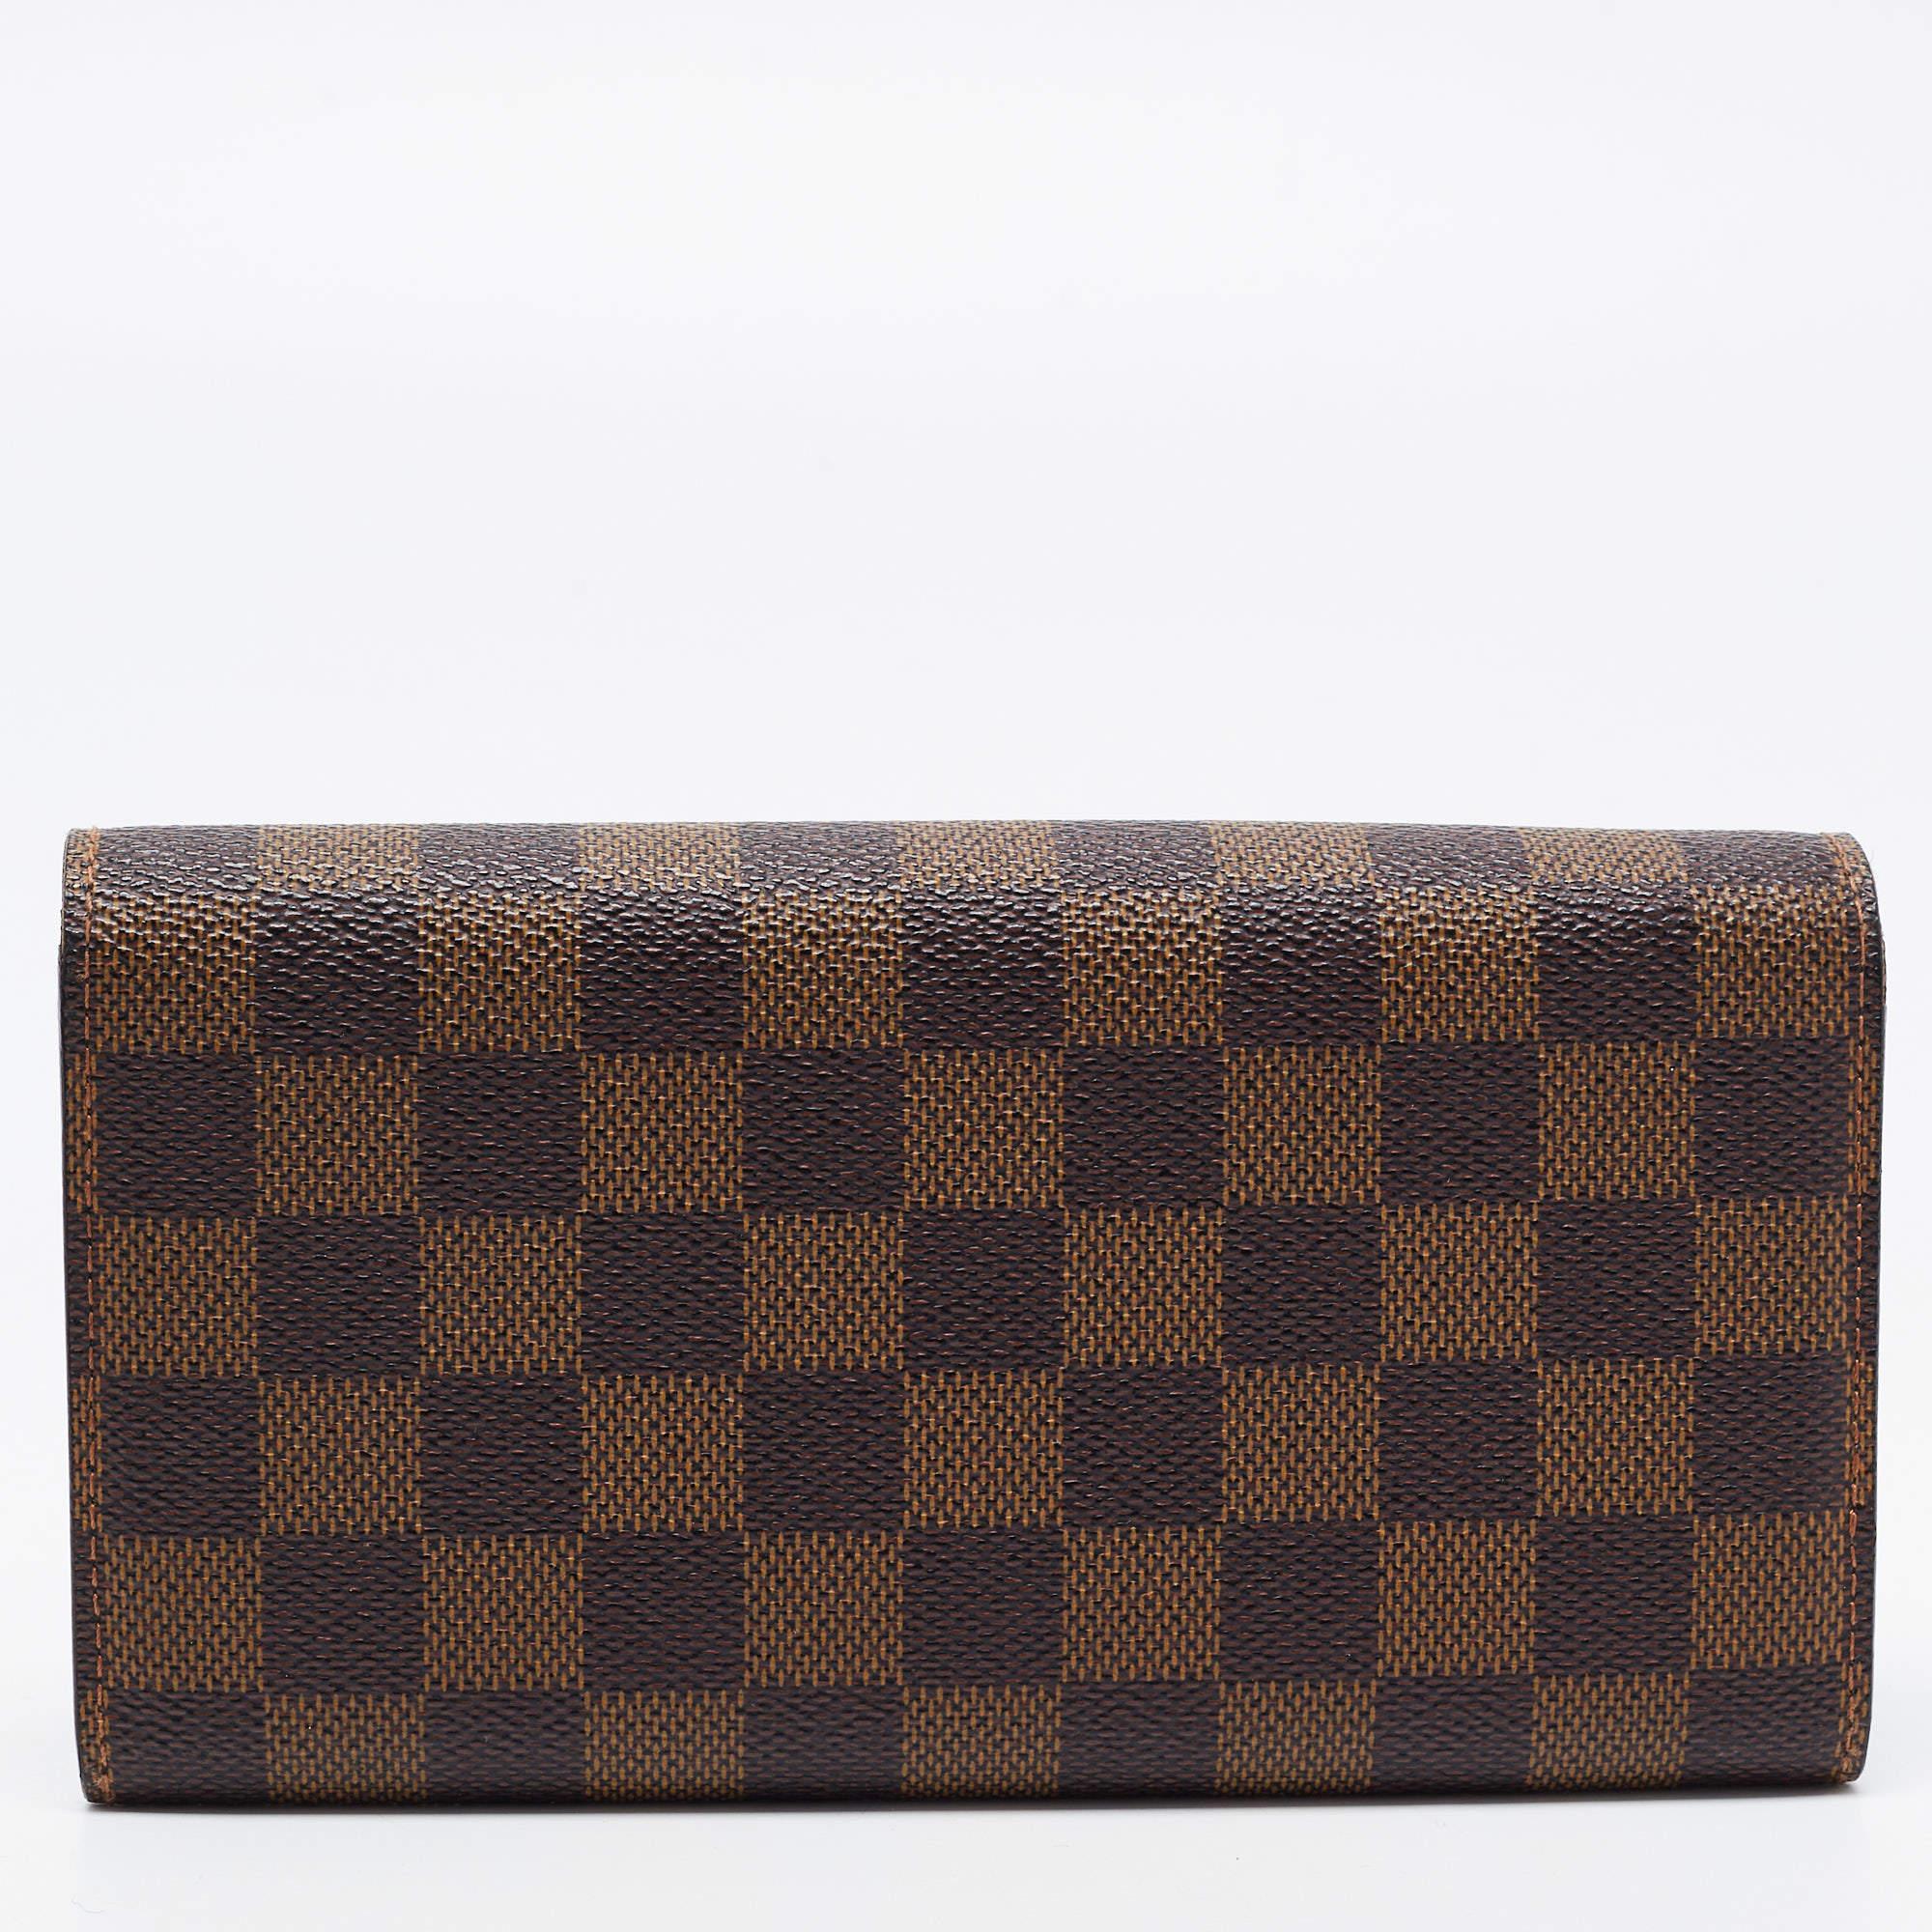 Crafted from the signature Damier Ebene canvas, this Louis Vuitton Sarah wallet is a valuable accessory. Its compartmentalized interior is perfect to store your monetary essentials, and the gold-tone accents add to the charm of the wallet.

